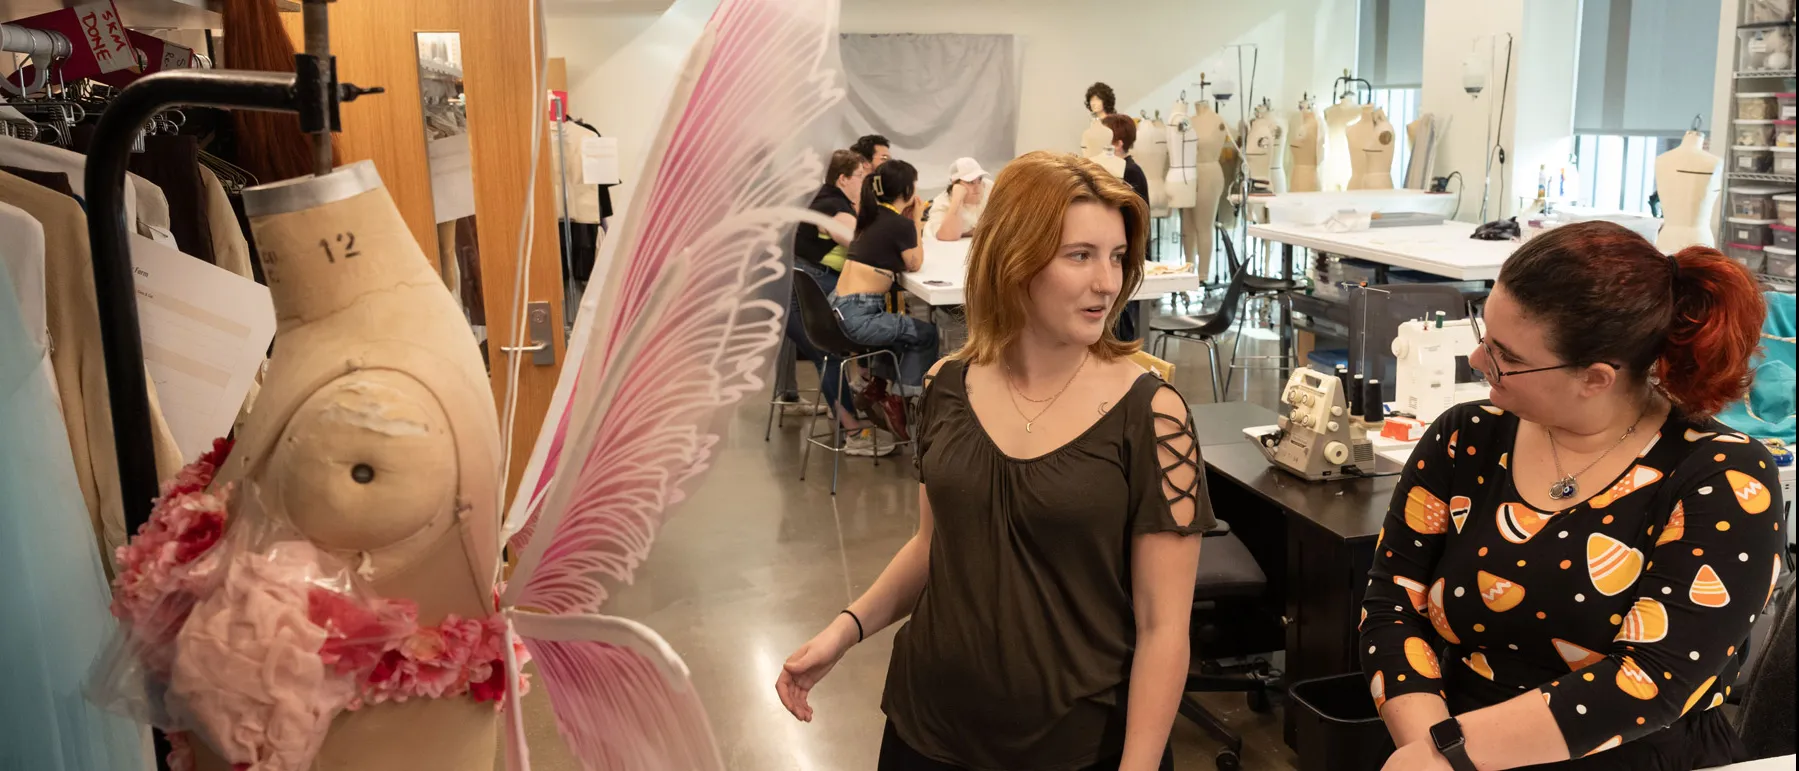 In the costume studio, a student a young woman with strawberry blond hair, smiles as she looks over her shoulder to chat with Catherine Huffman, the lead costume designer for She Kills Monsters, the play Emily is starring in.